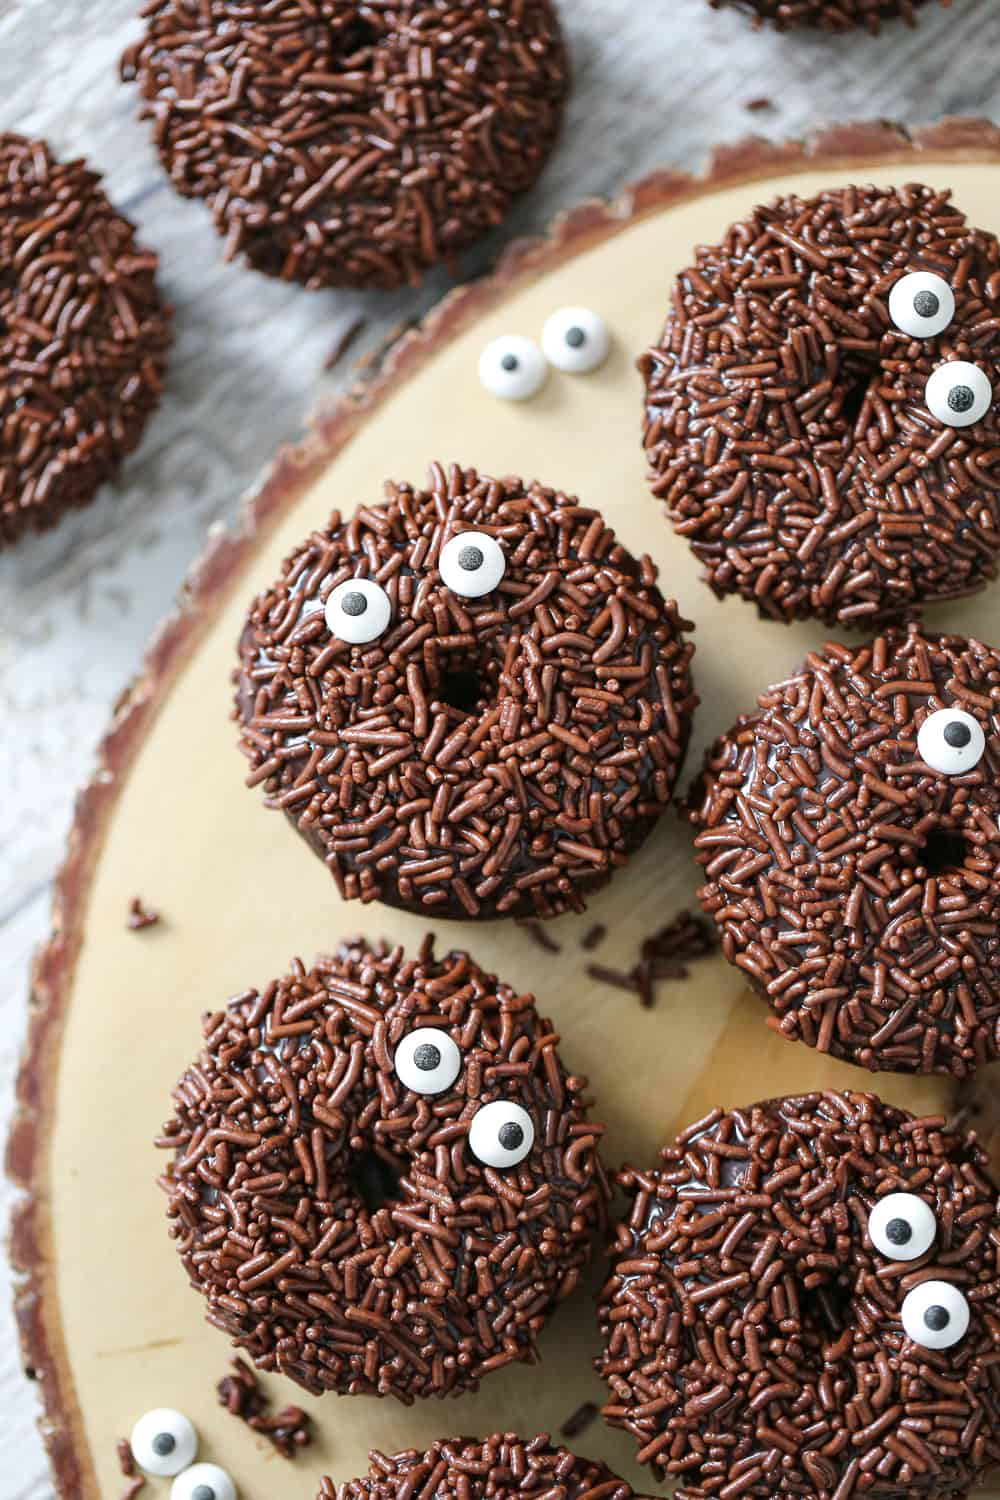 These Fun Chocolate Sprinkle Donuts make the most fun breakfast or party goodies and they’re easy to mix up since they’re baked instead of fried!  These mini chocolate donuts are perfect for Halloween and when chocolate treats are on the radar!